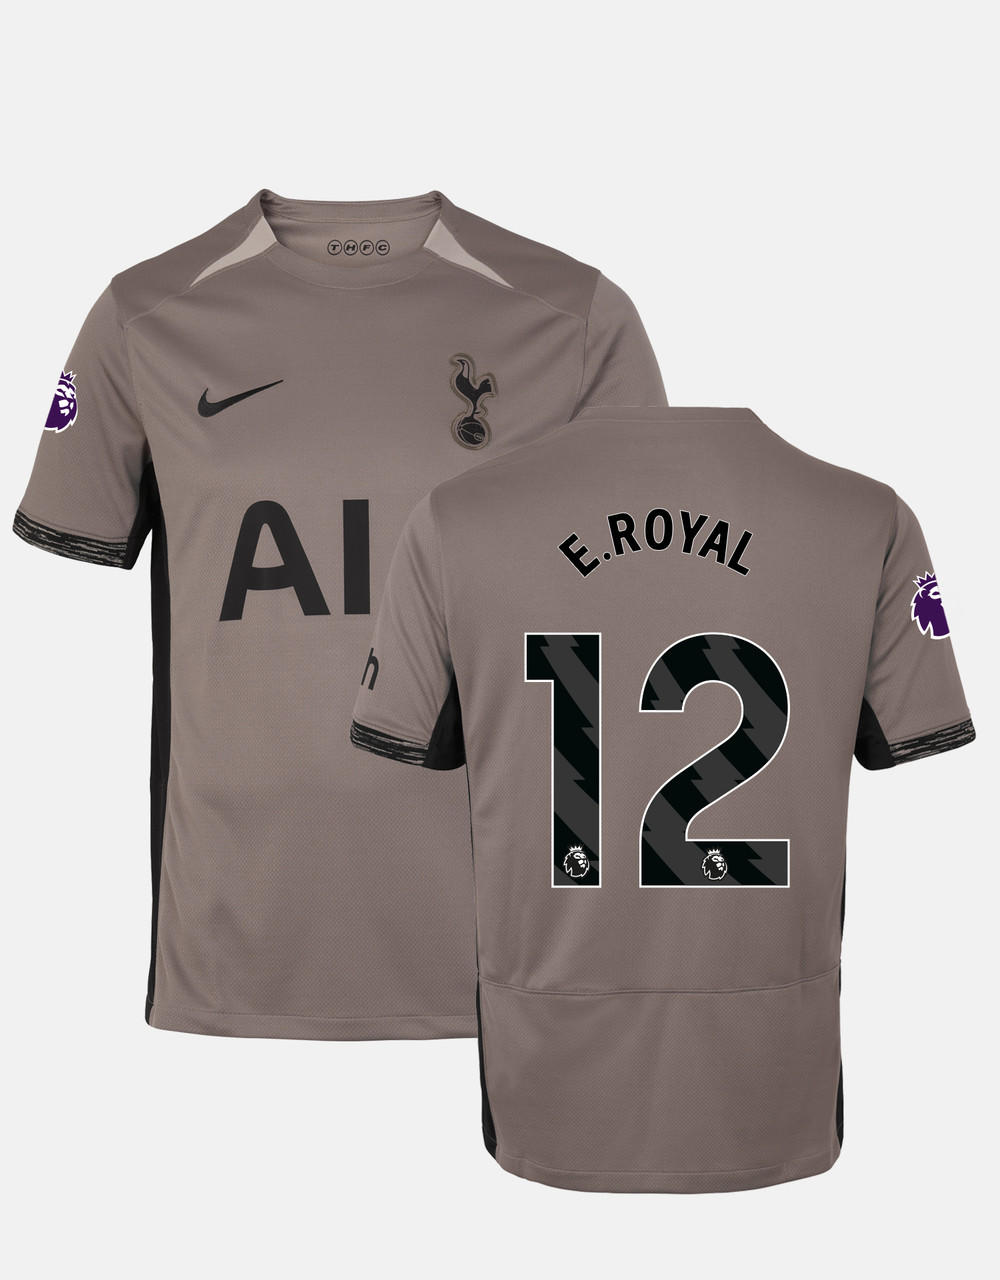 Nike Tottenham Emerson Royal Home Jersey w/ Champions League Patches 2 -  Soccer Wearhouse